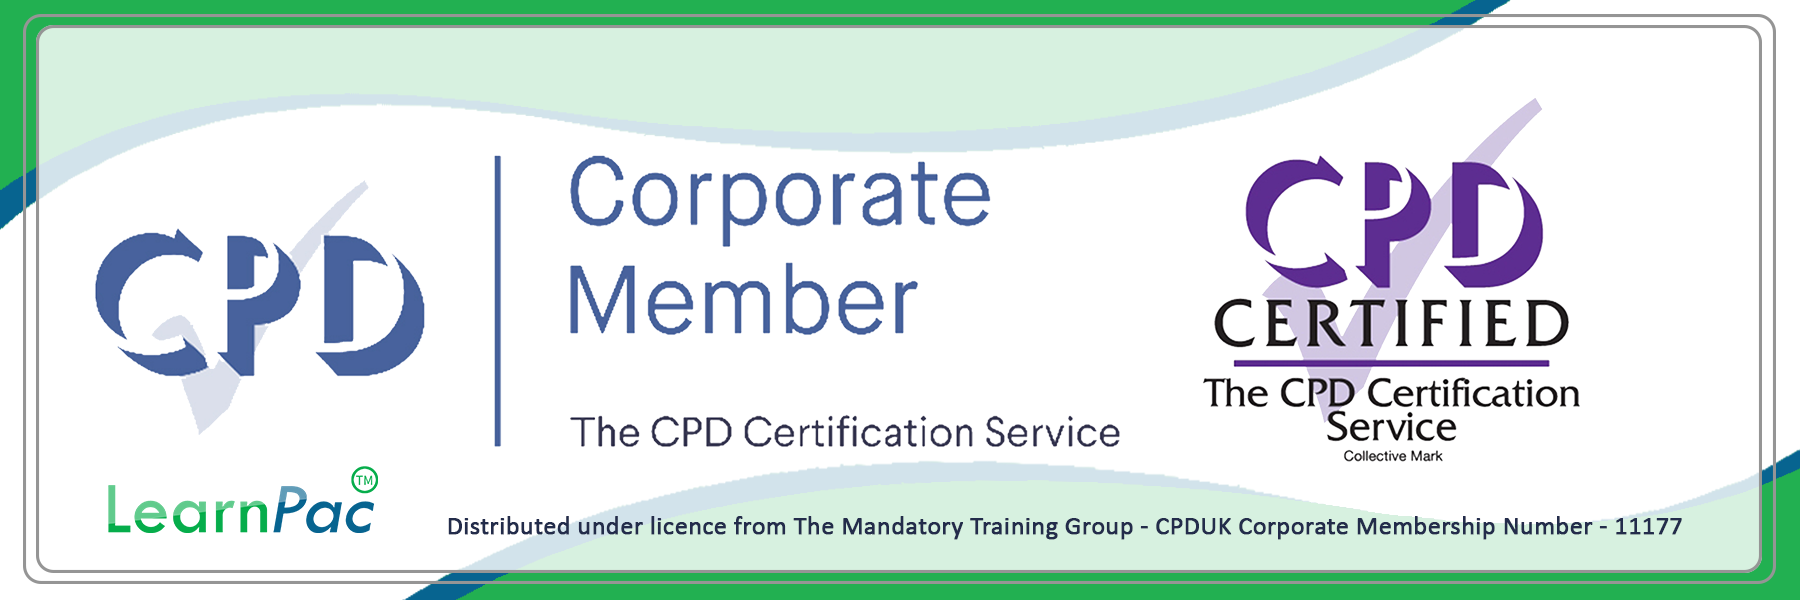 Dual Diagnosis Training - E-Learning Courses with Certificates - CPD Certified - LearnPac Systems UK -